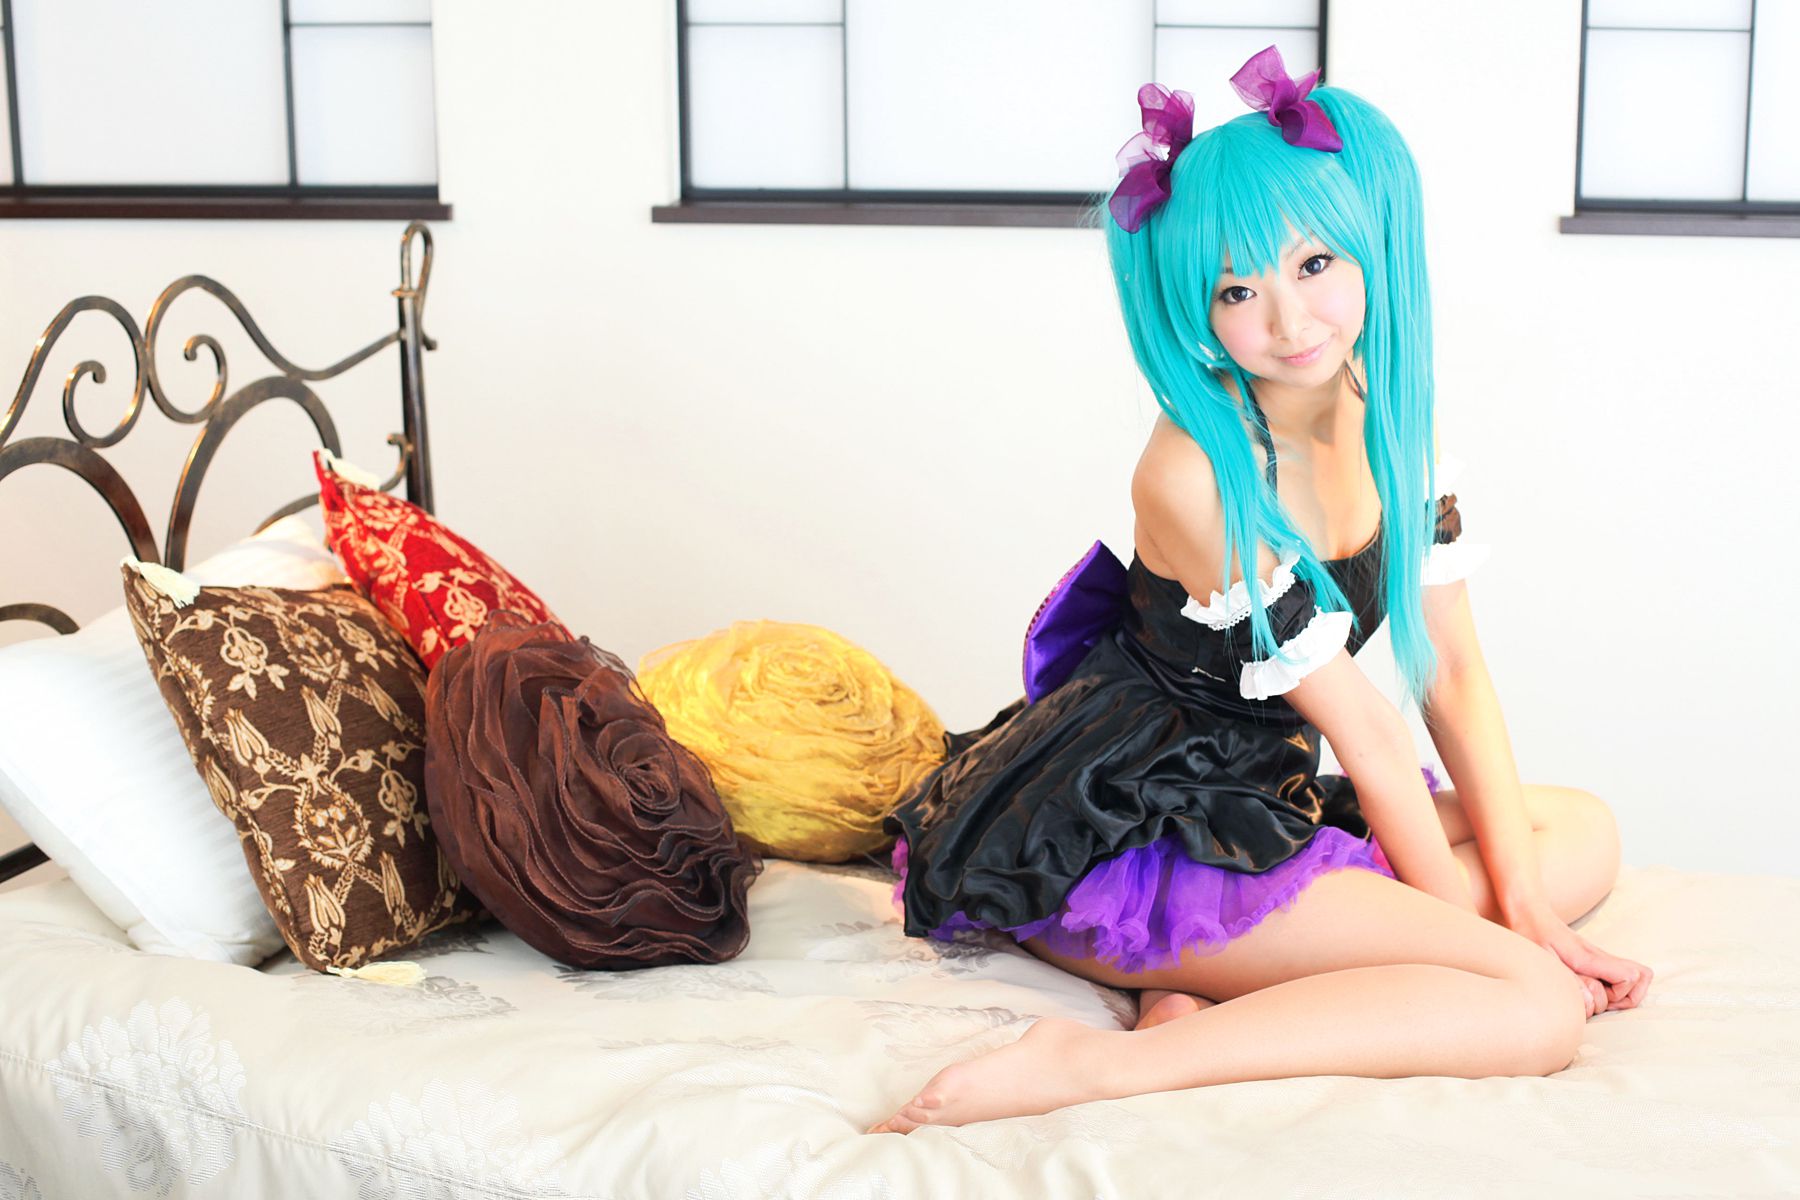 taotuhome[Cosplay] Necoco as Hatsune Miku from Vocaloid 套图第162张